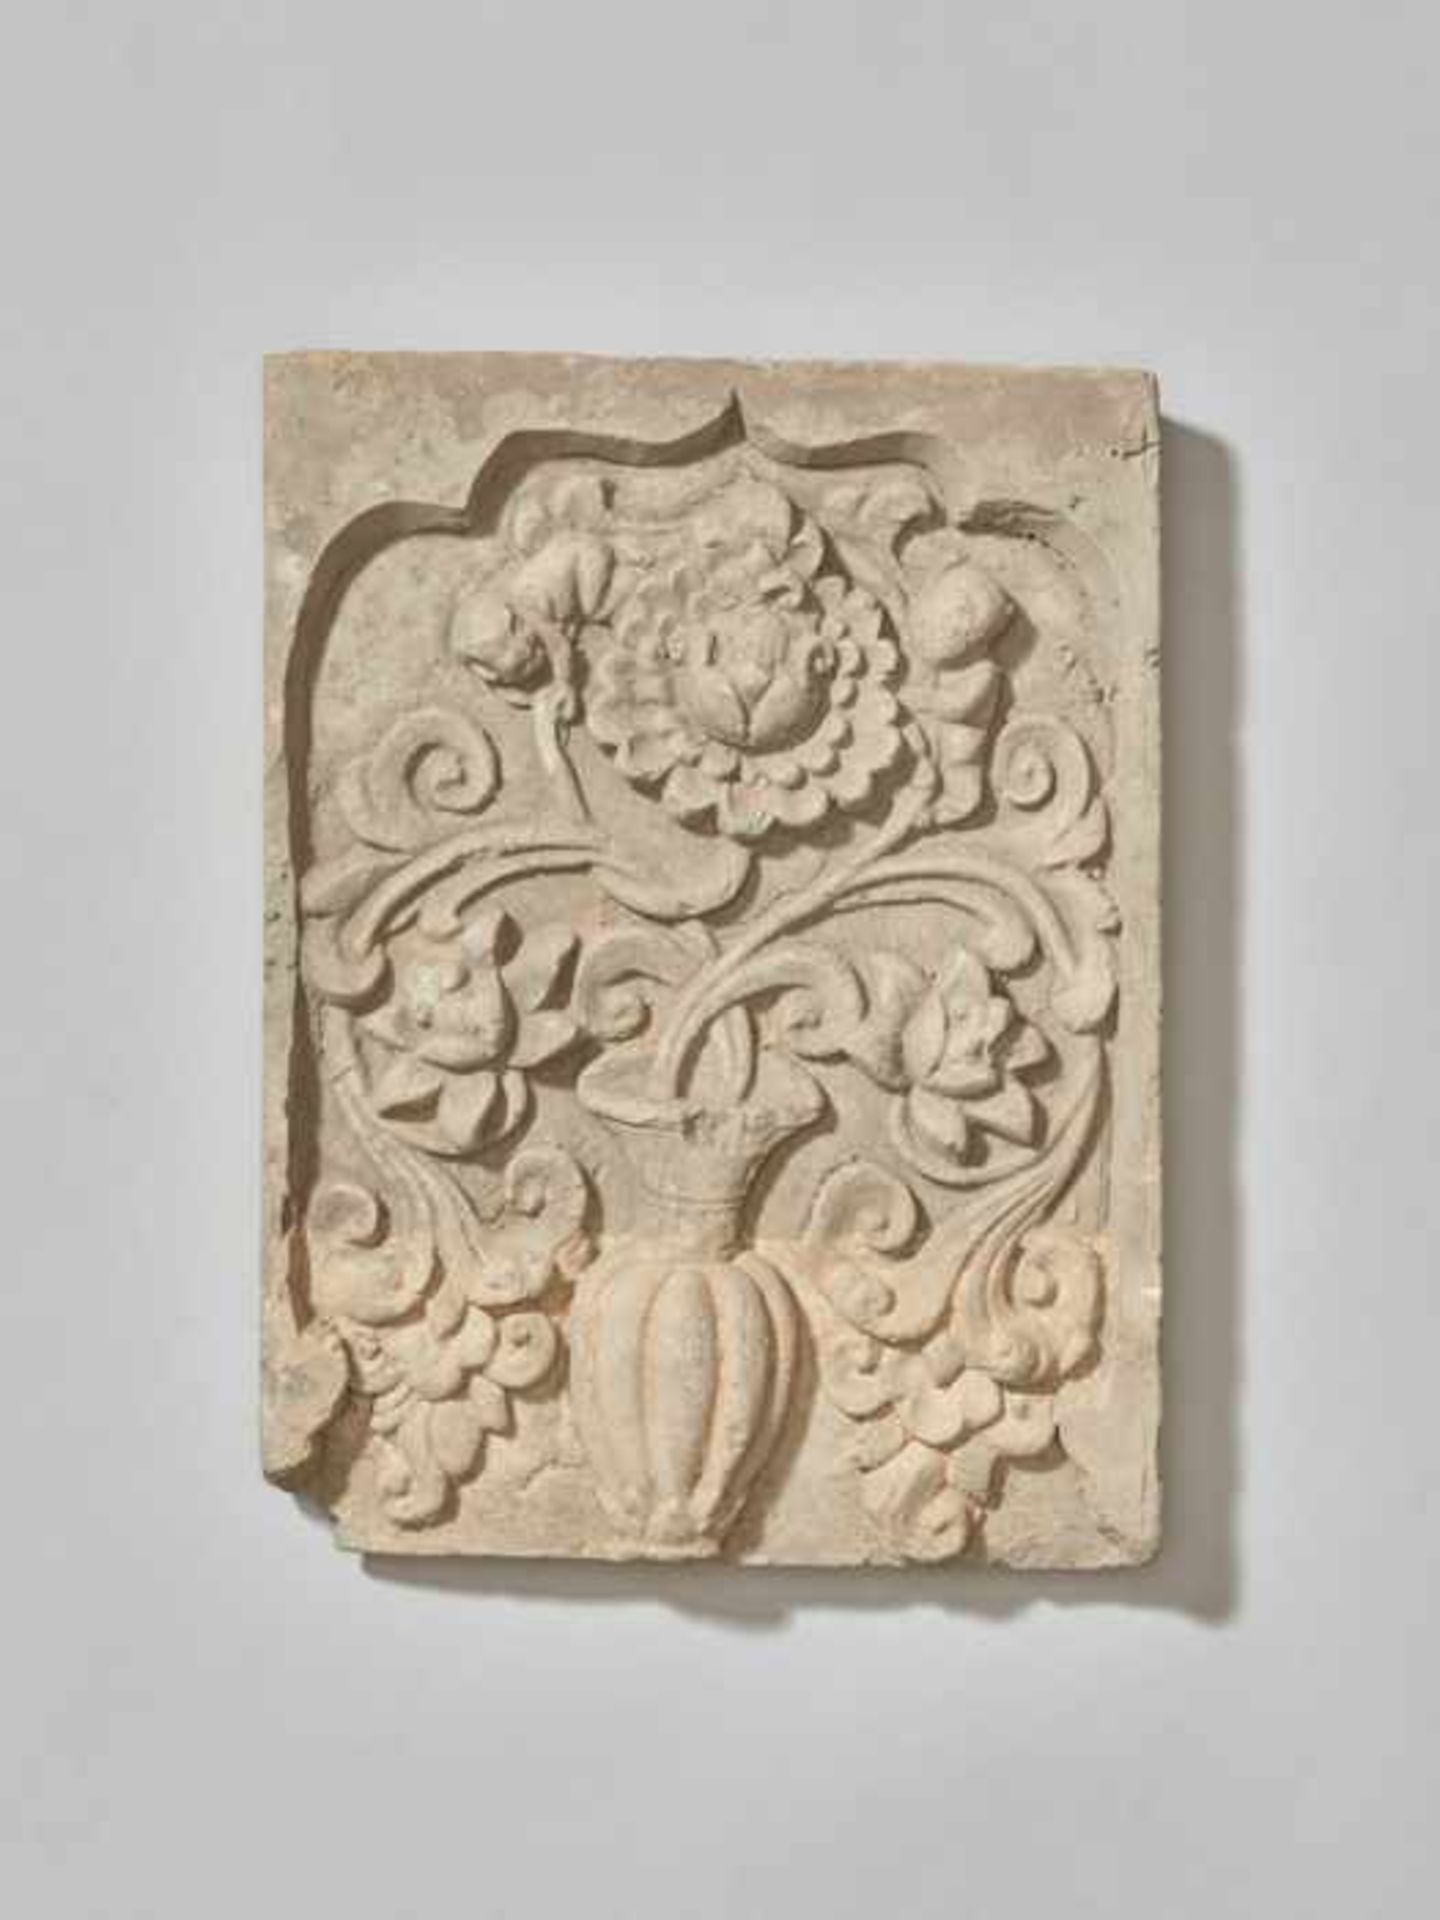 A LARGE GROUP OF 15 CHINESE TERRACOTTA WALL TILES, QING DYNASTY Each tile made of carved and fired - Image 4 of 16